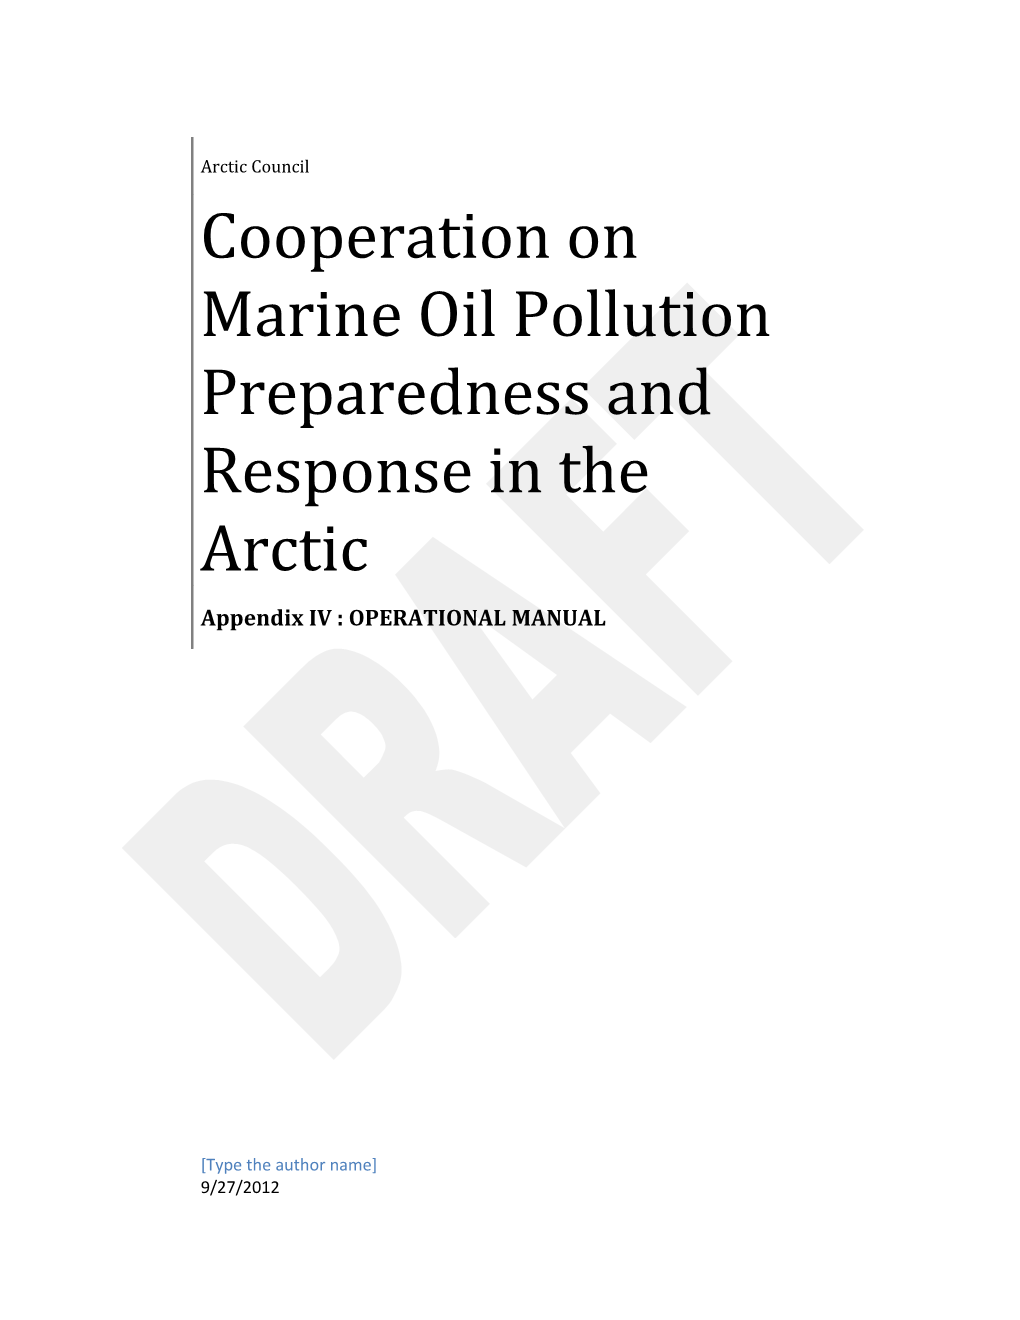 Cooperation on Marine Oil Pollution Preparedness and Response in the Arctic